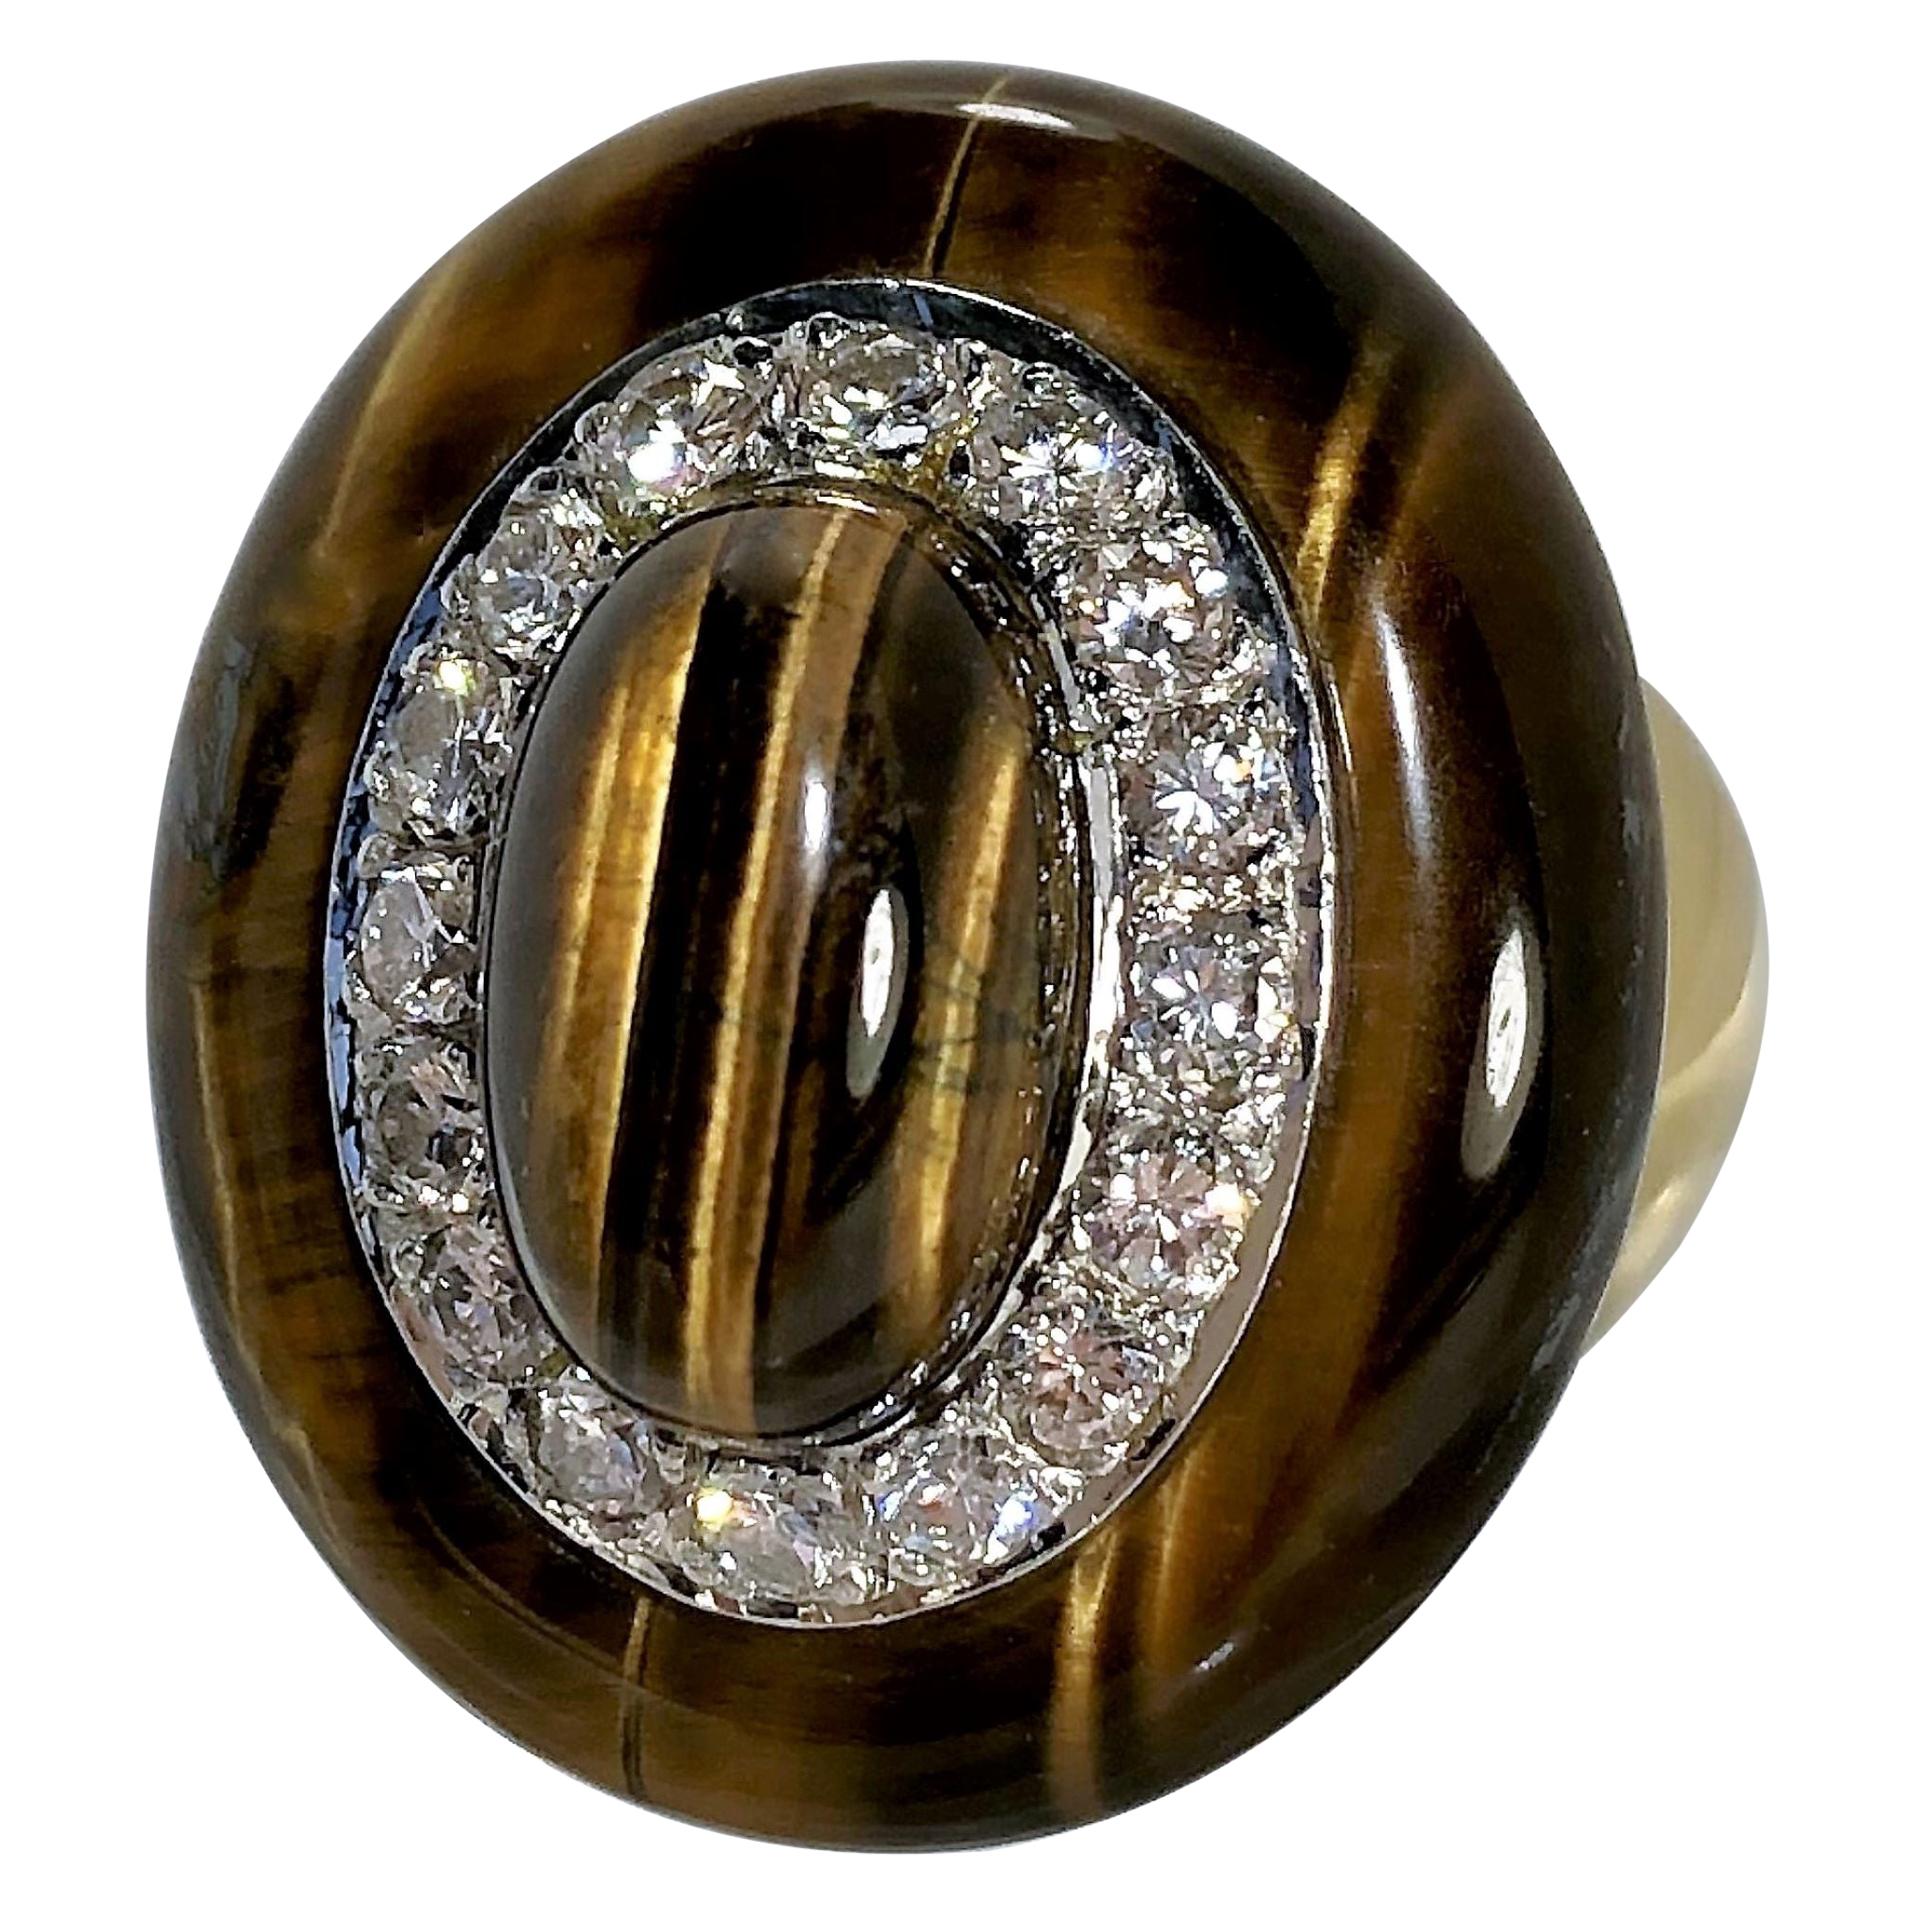 Crafted in 18K Yellow Gold, this striking 1970s oval shaped, Tiger's Eye and diamond ring
measures a substantial 1 inch high (25.3mm)  by 7/8 inch wide (22mm). The 16 round brilliant 
cut diamonds that surround the center Tiger's Eye Cabochon are